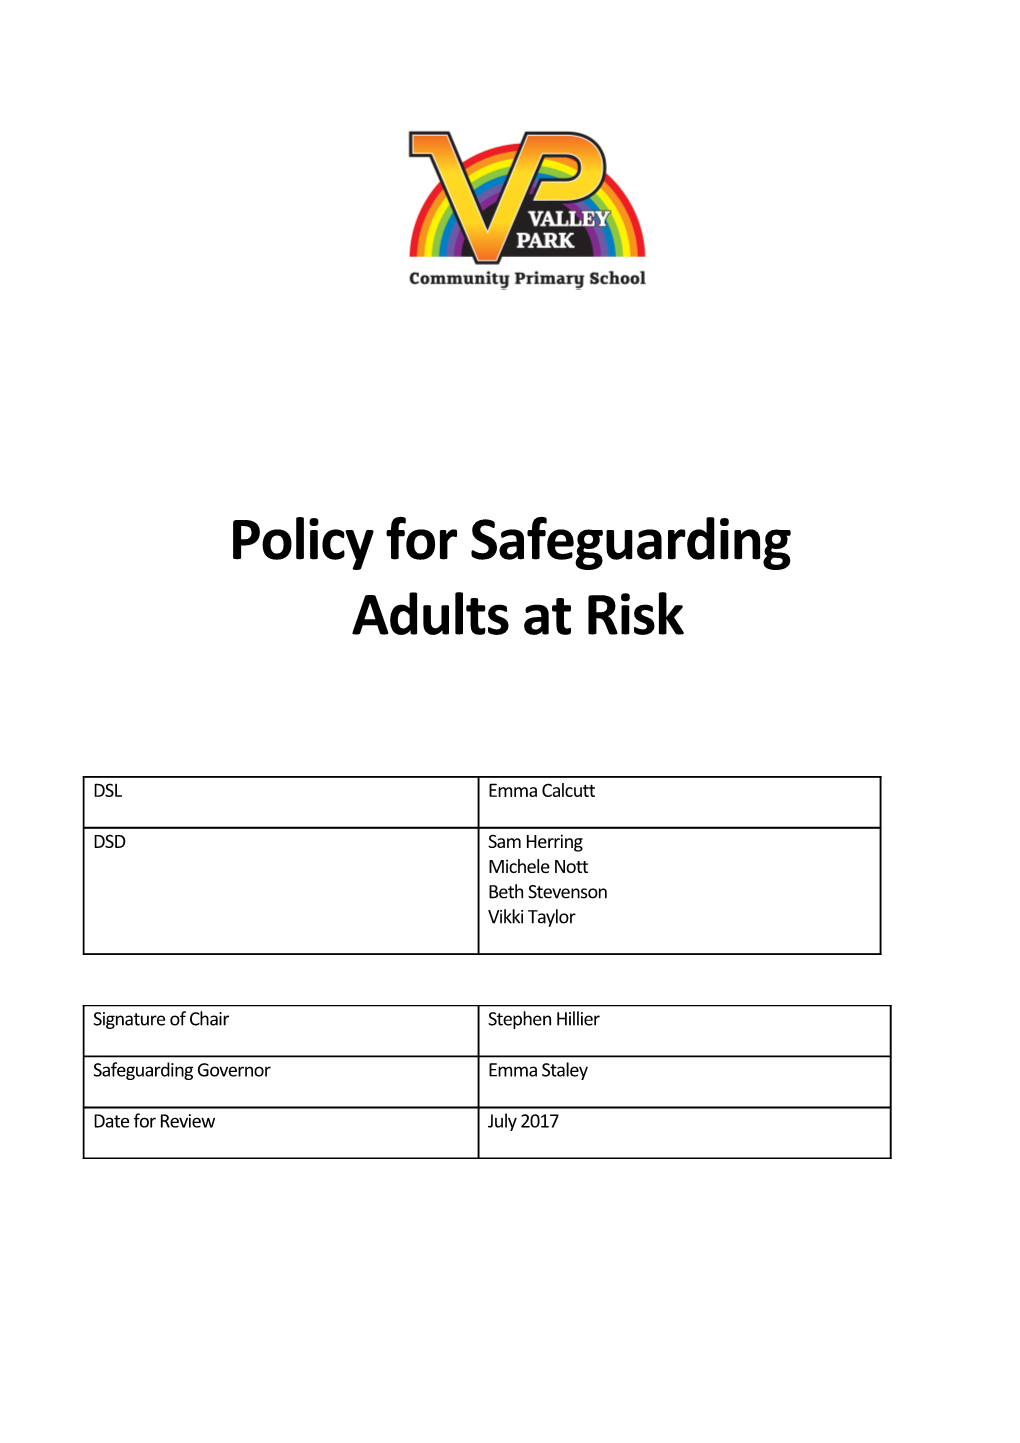 Policy Statement for Safeguarding